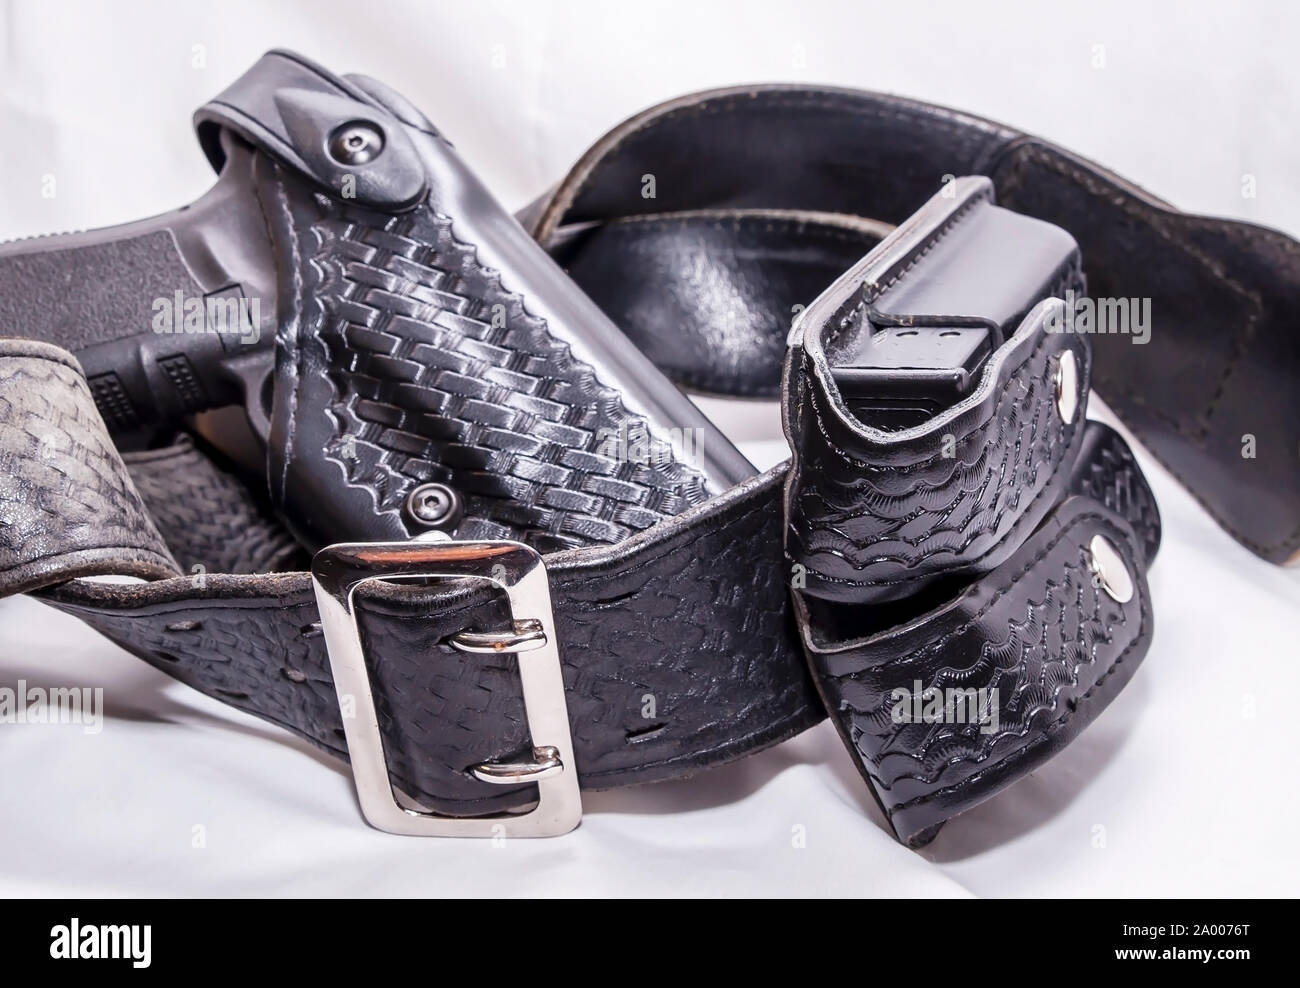 A worn police duty belt with a black pistol and two pistol magazine case wrapped up on a white background Stock Photo